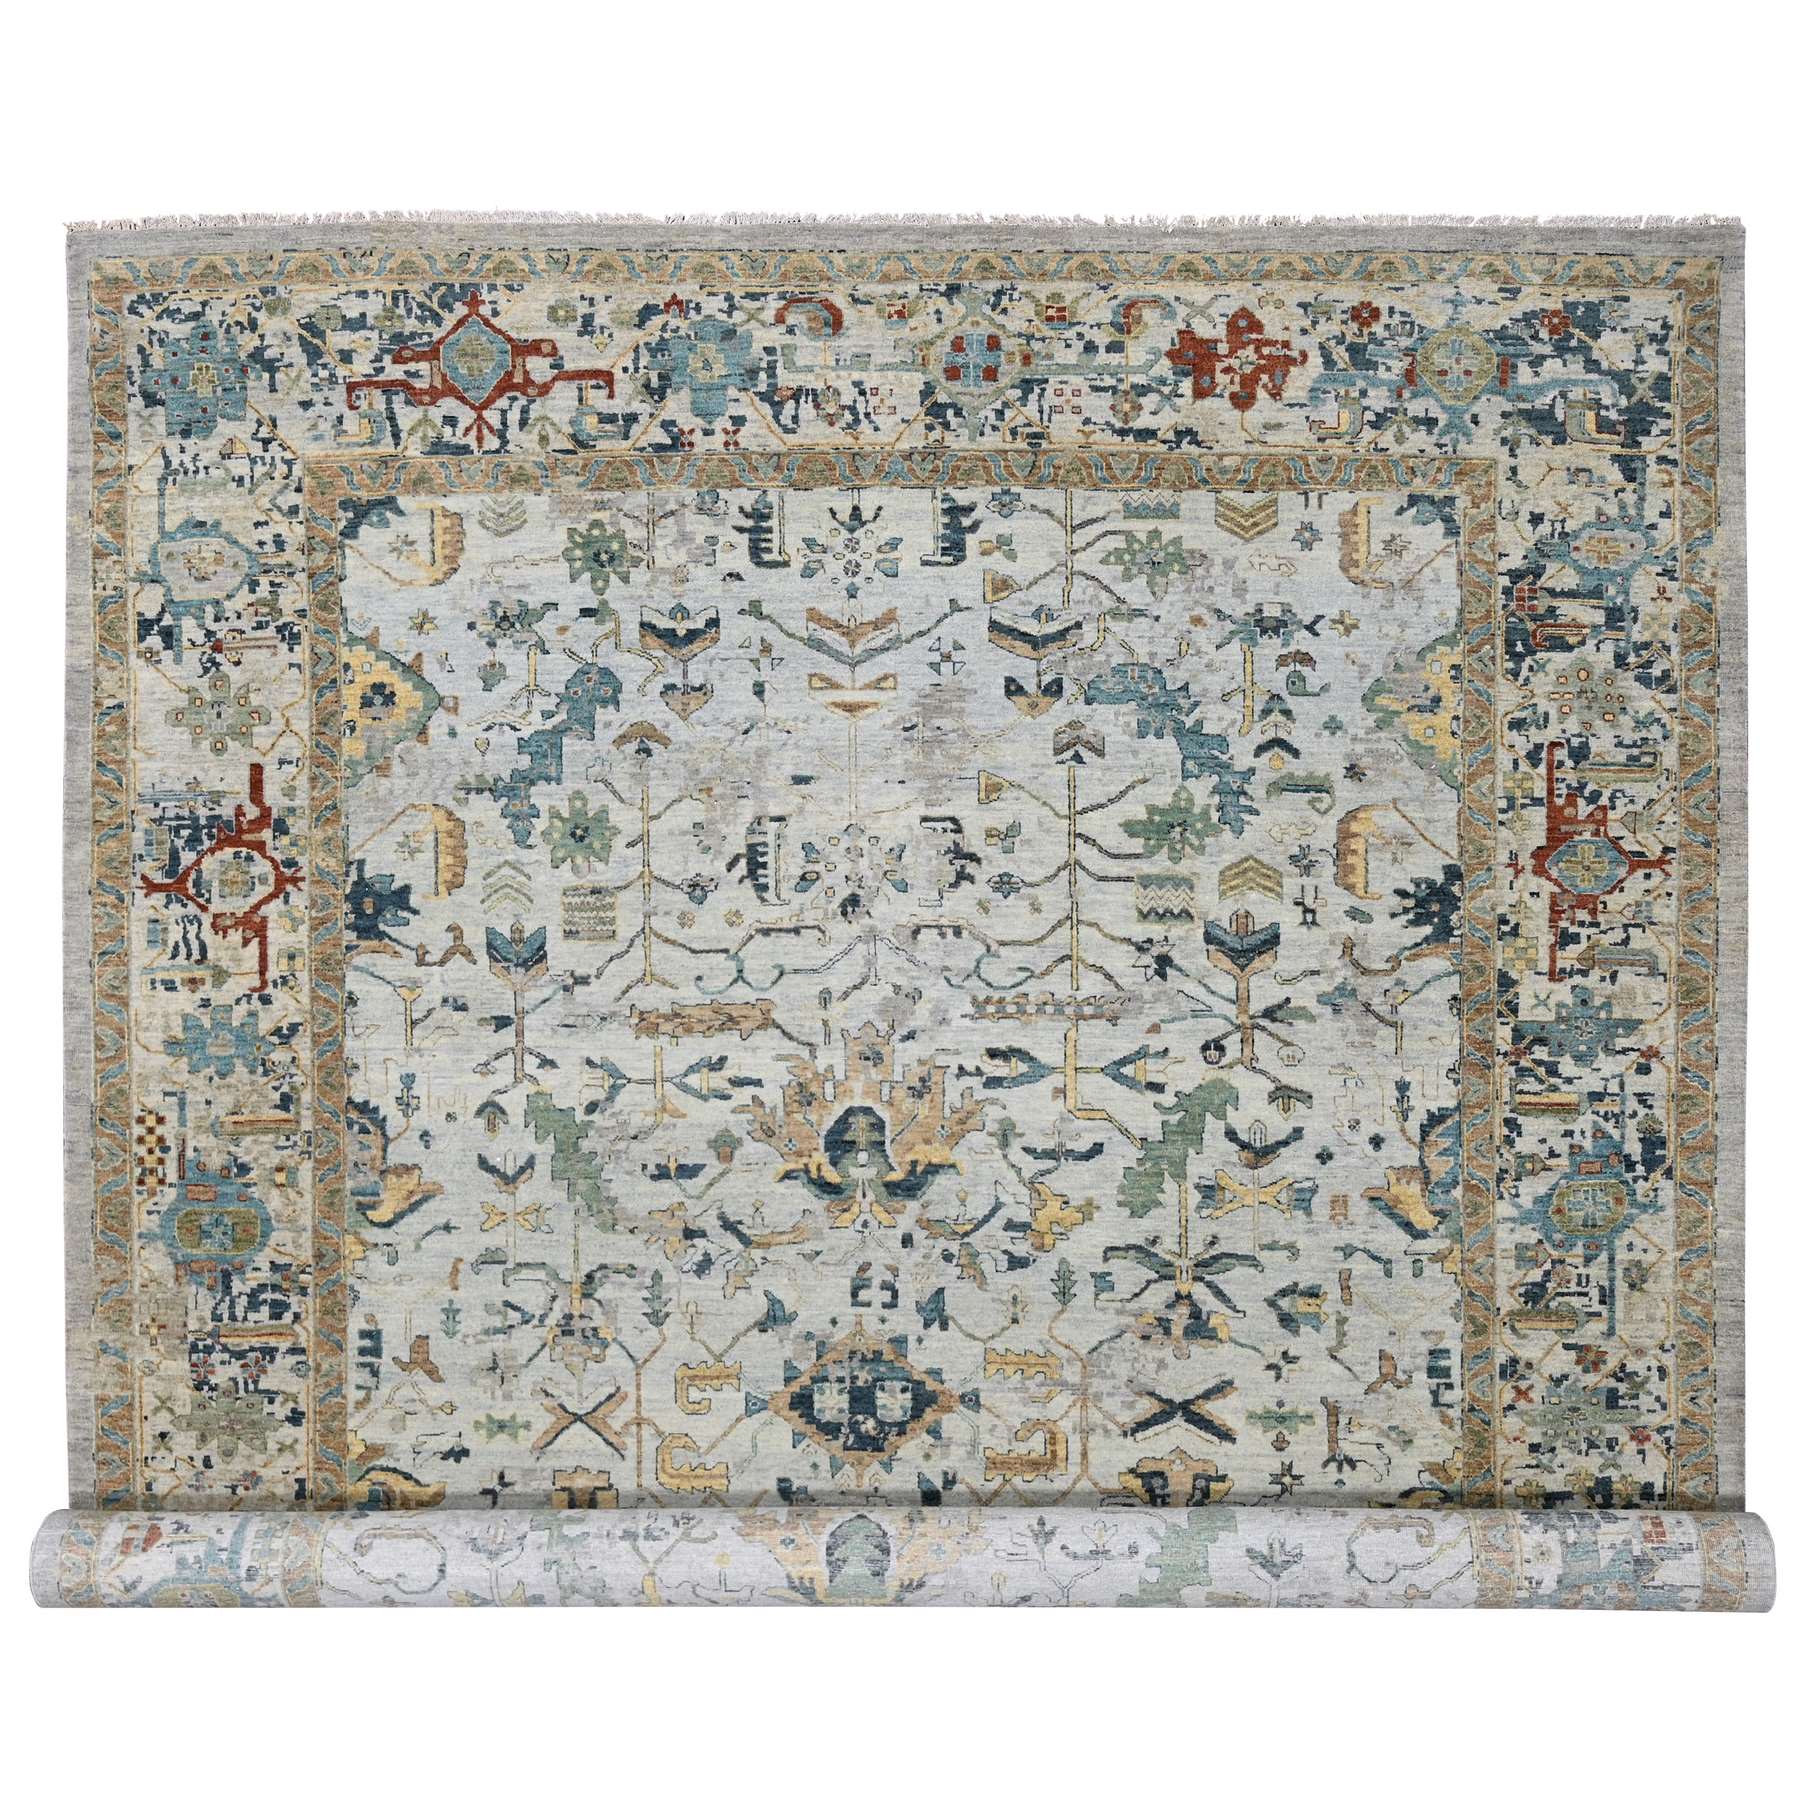  Wool Hand-Knotted Area Rug 9'9